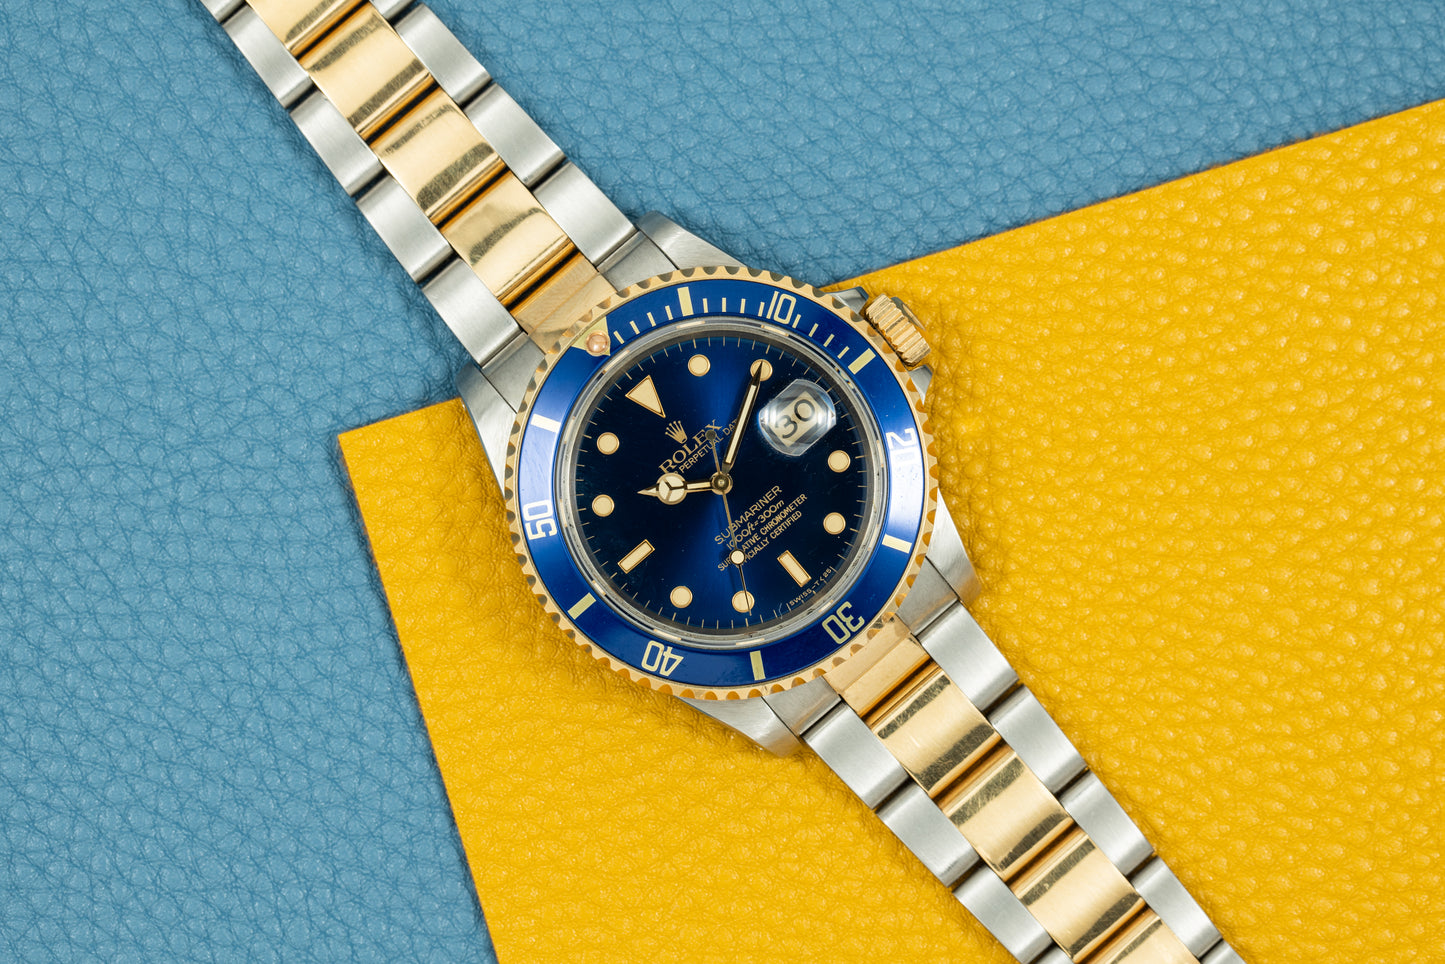 Rolex Submariner Two-Tone Yellow Gold & Steel Rolesor